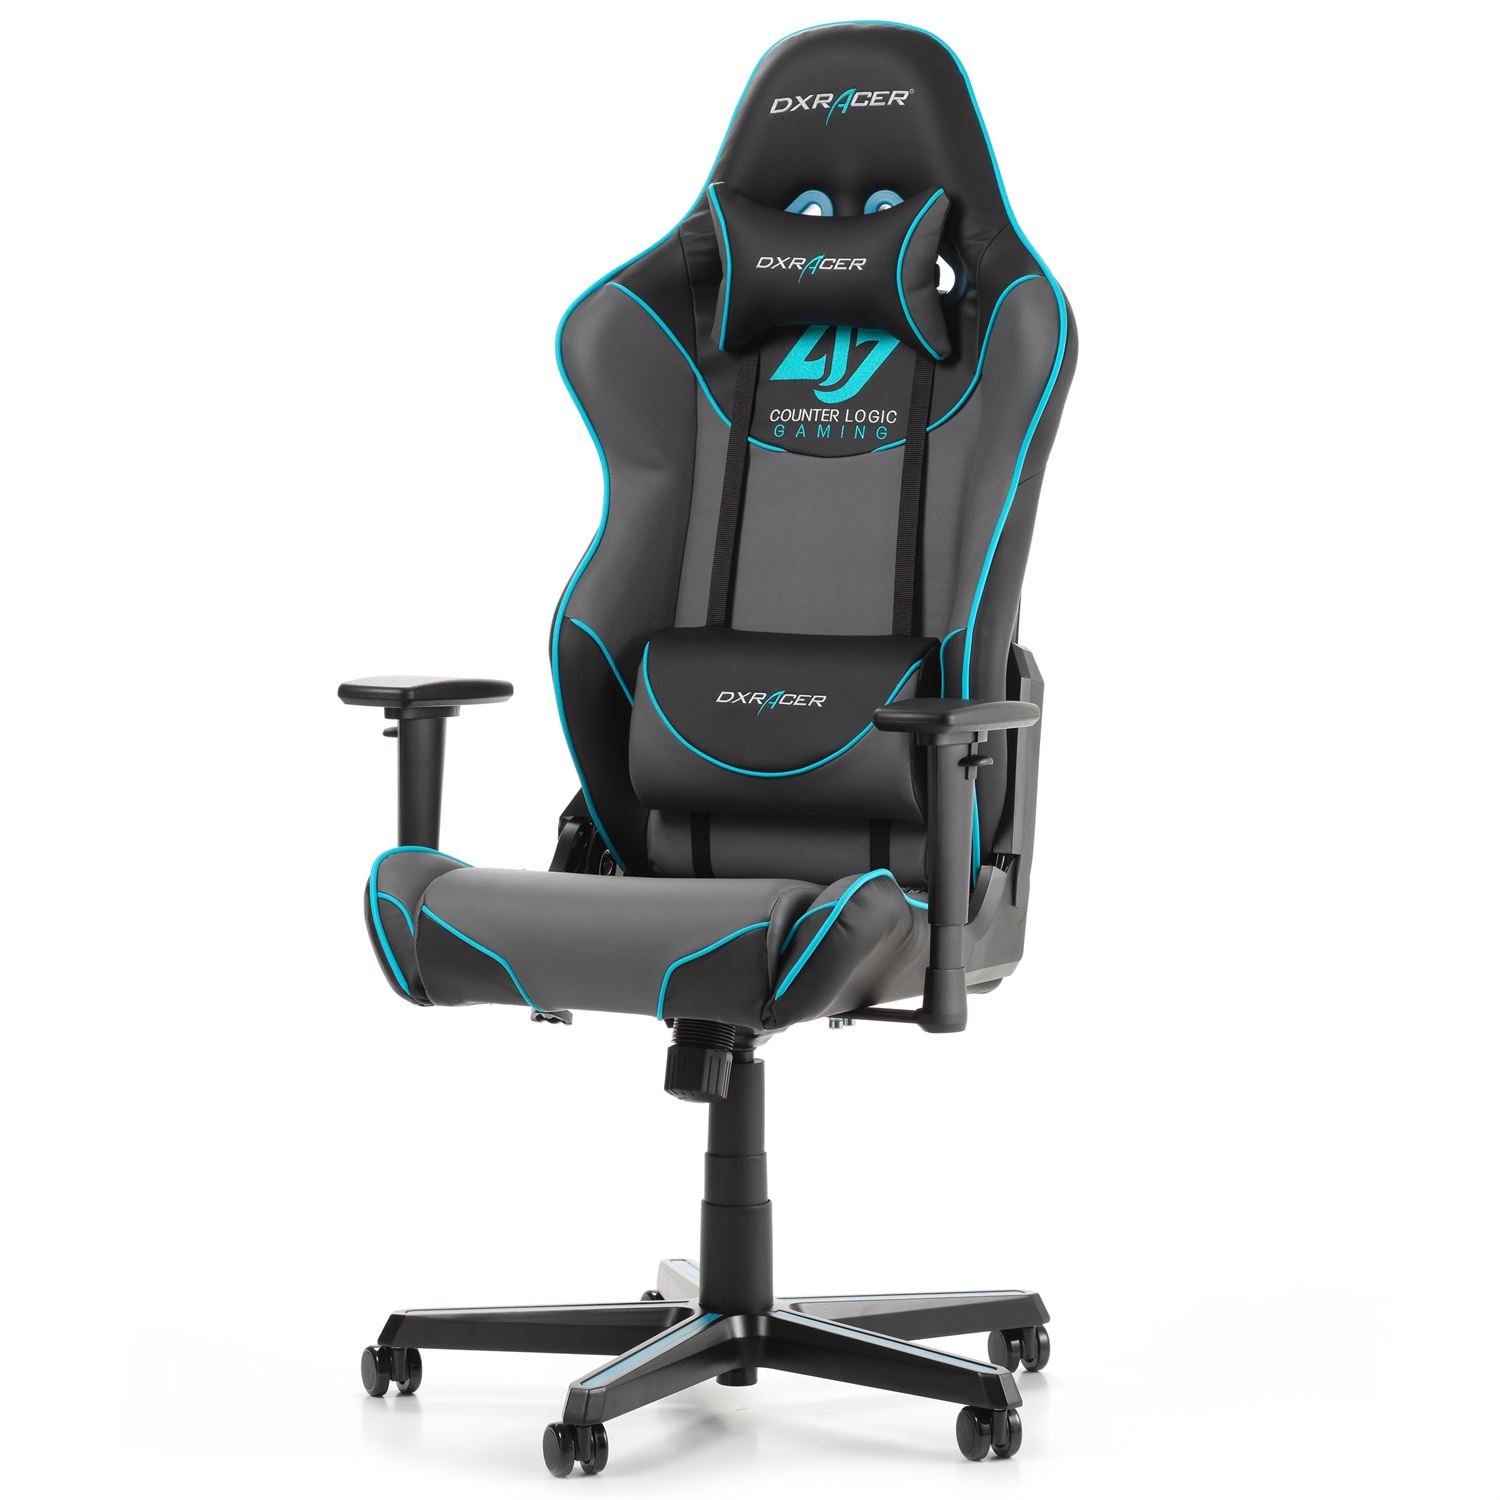  DXRacer  RACING Gaming  Chair  Counter Logic Gaming  Edition 